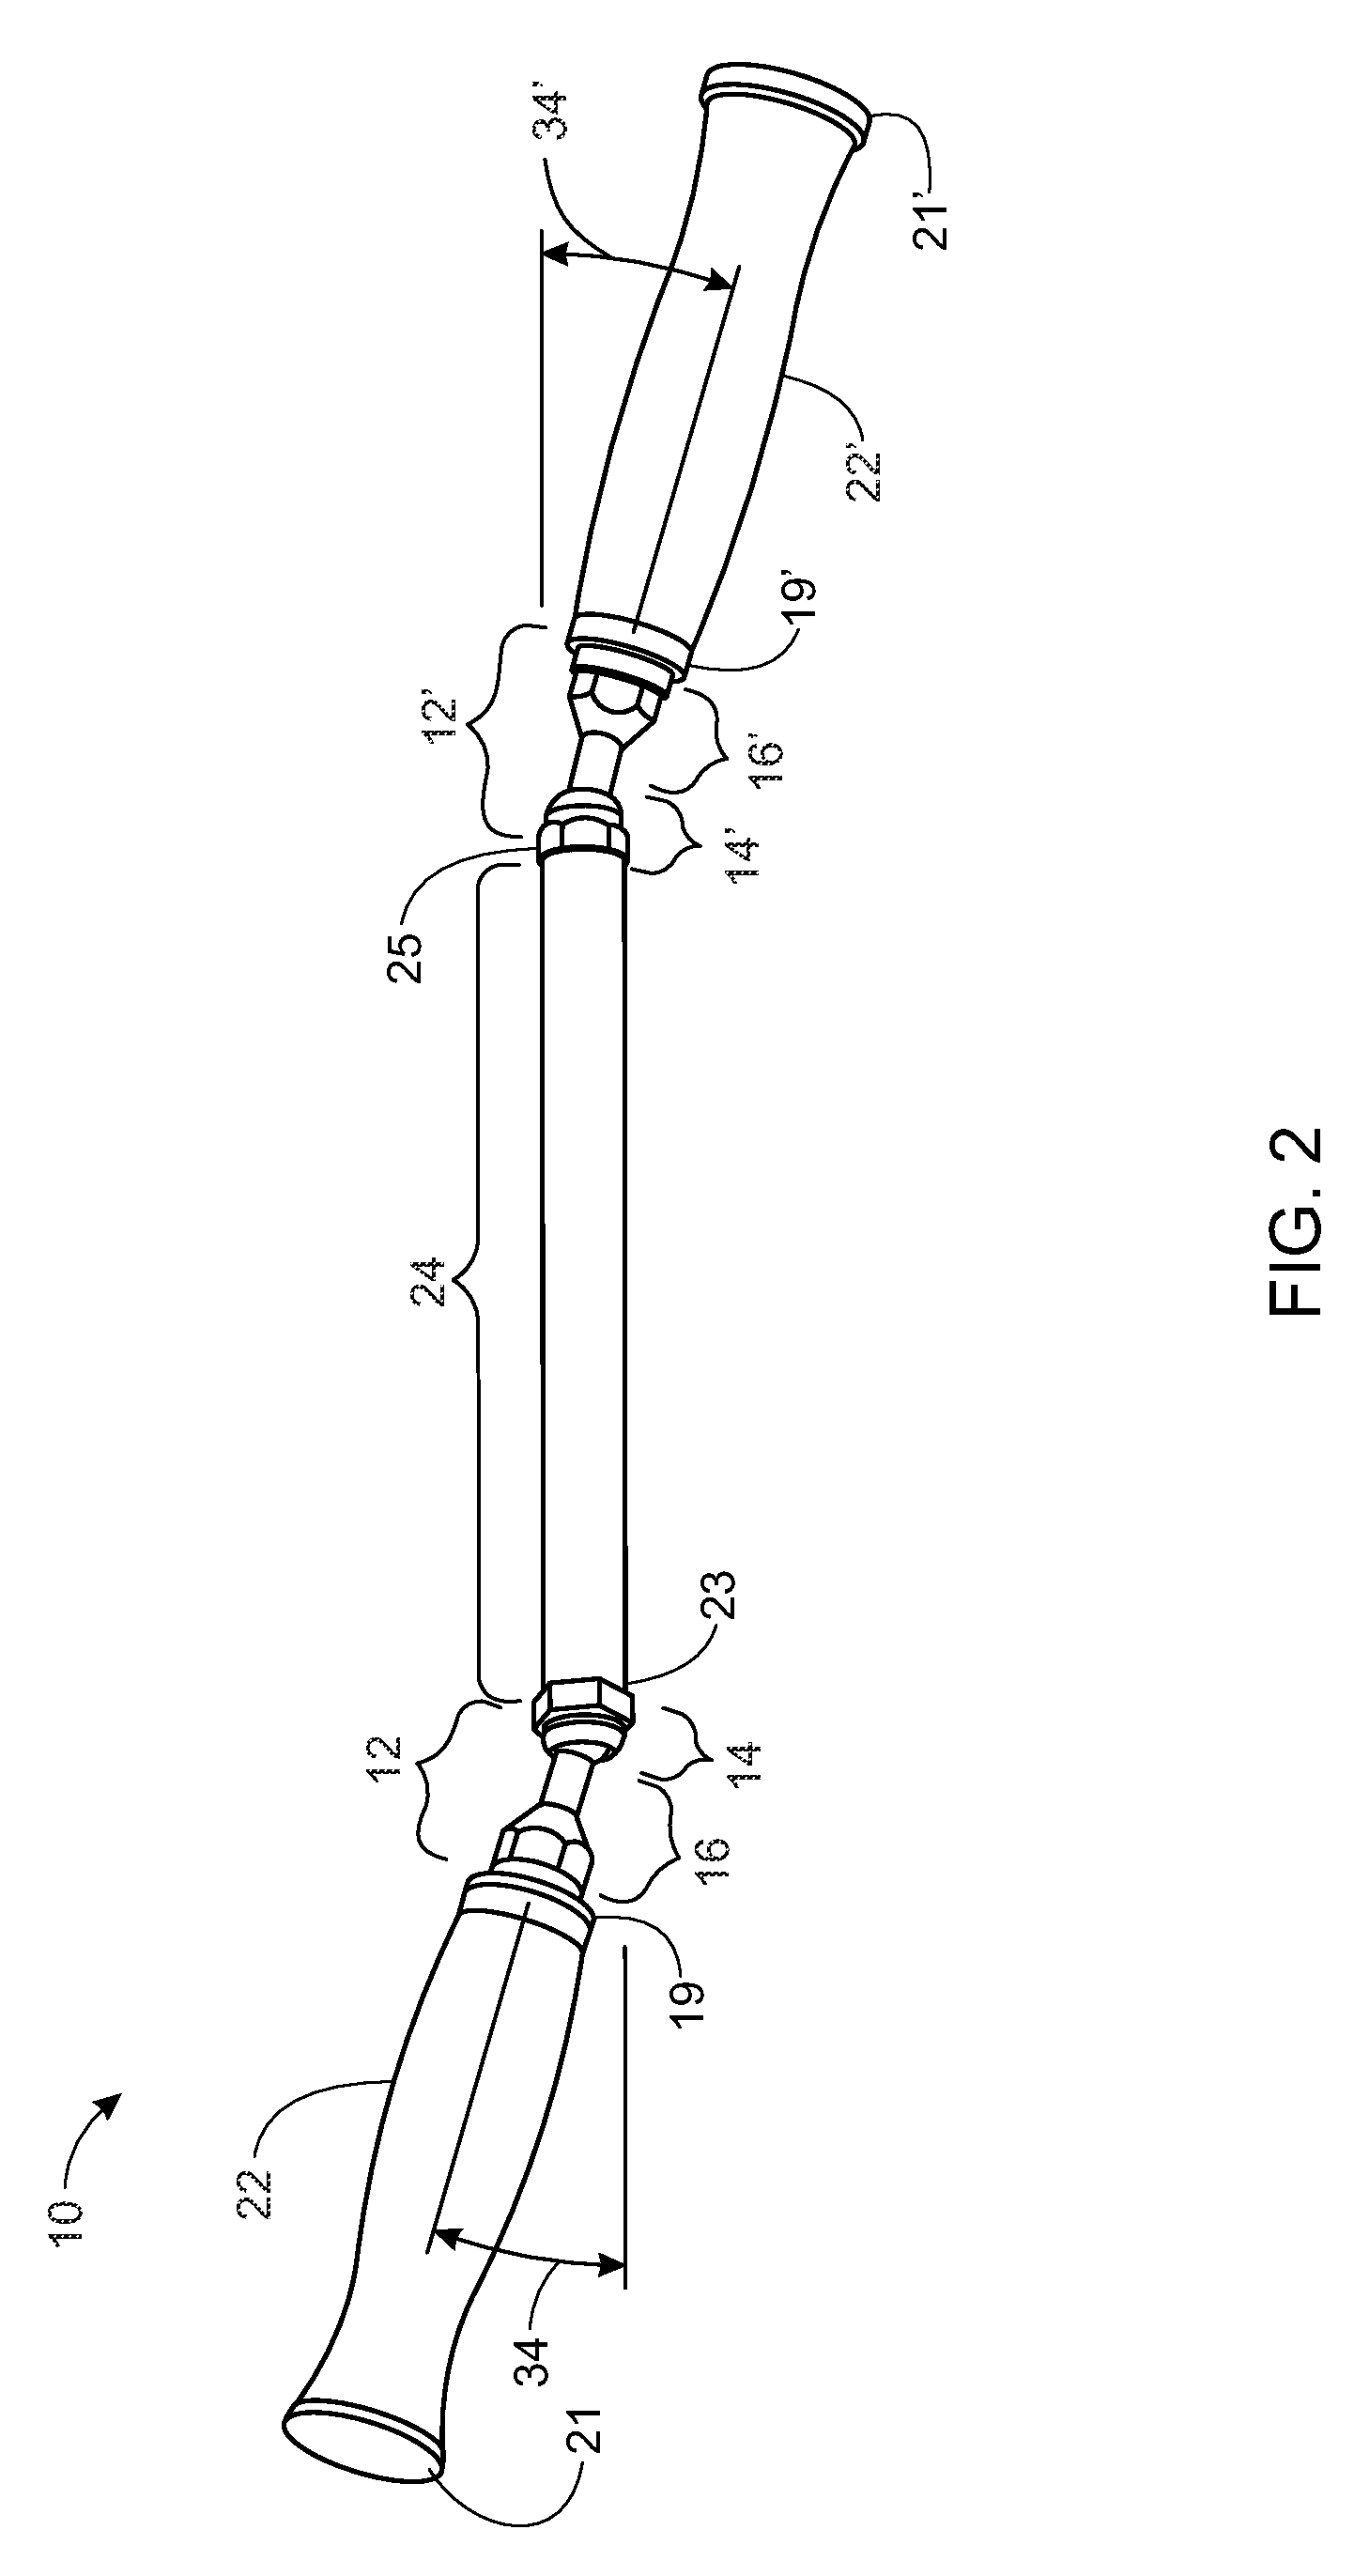 Ergonomic rotational muscle stretching device and method